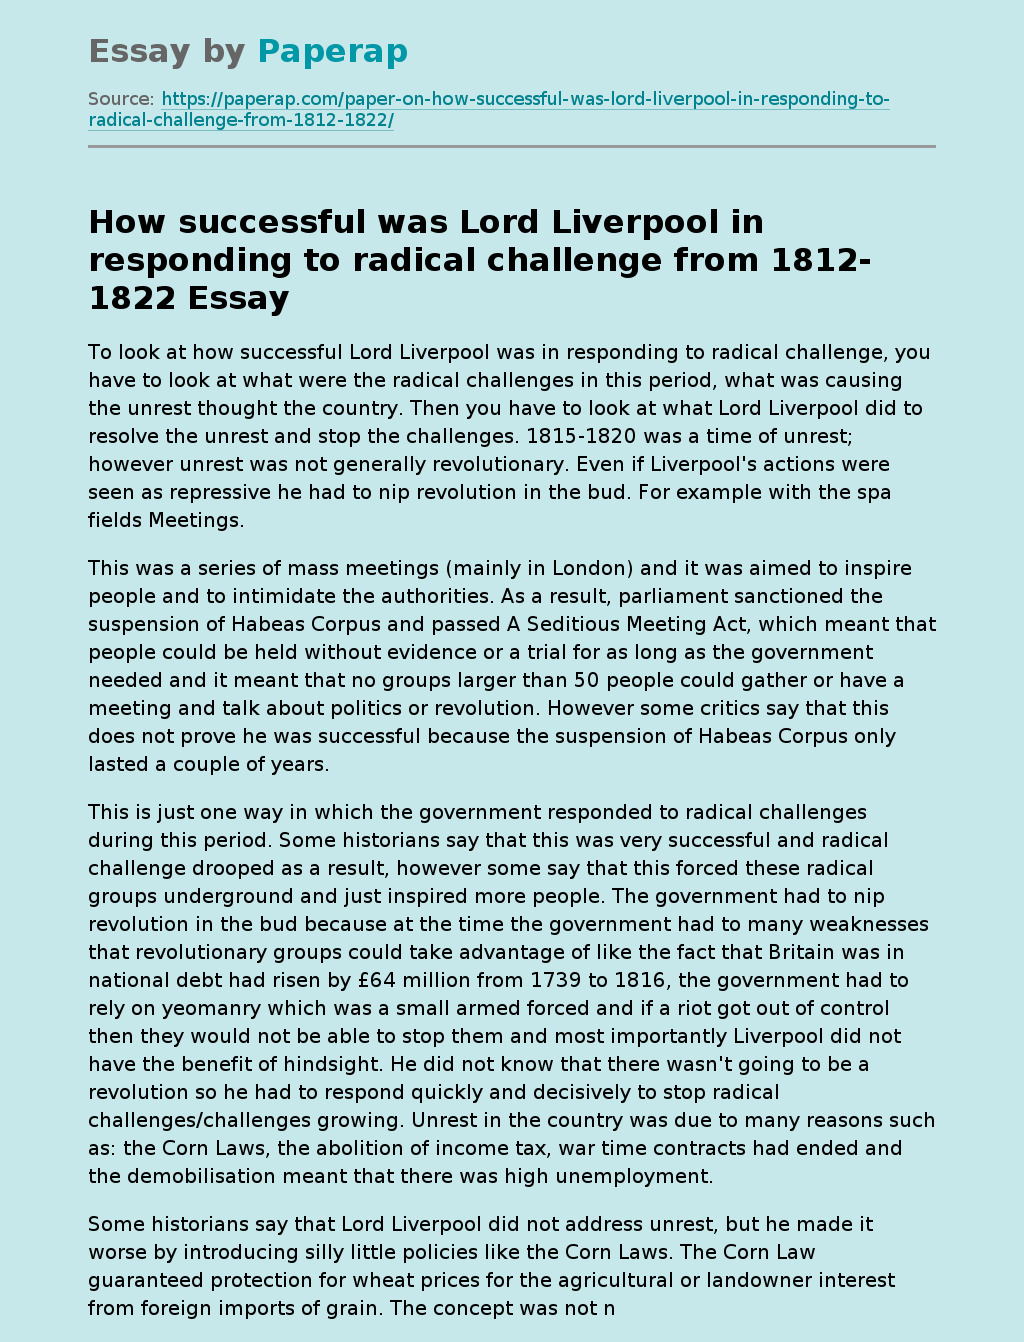 Lord Liverpool's response to radical challenge